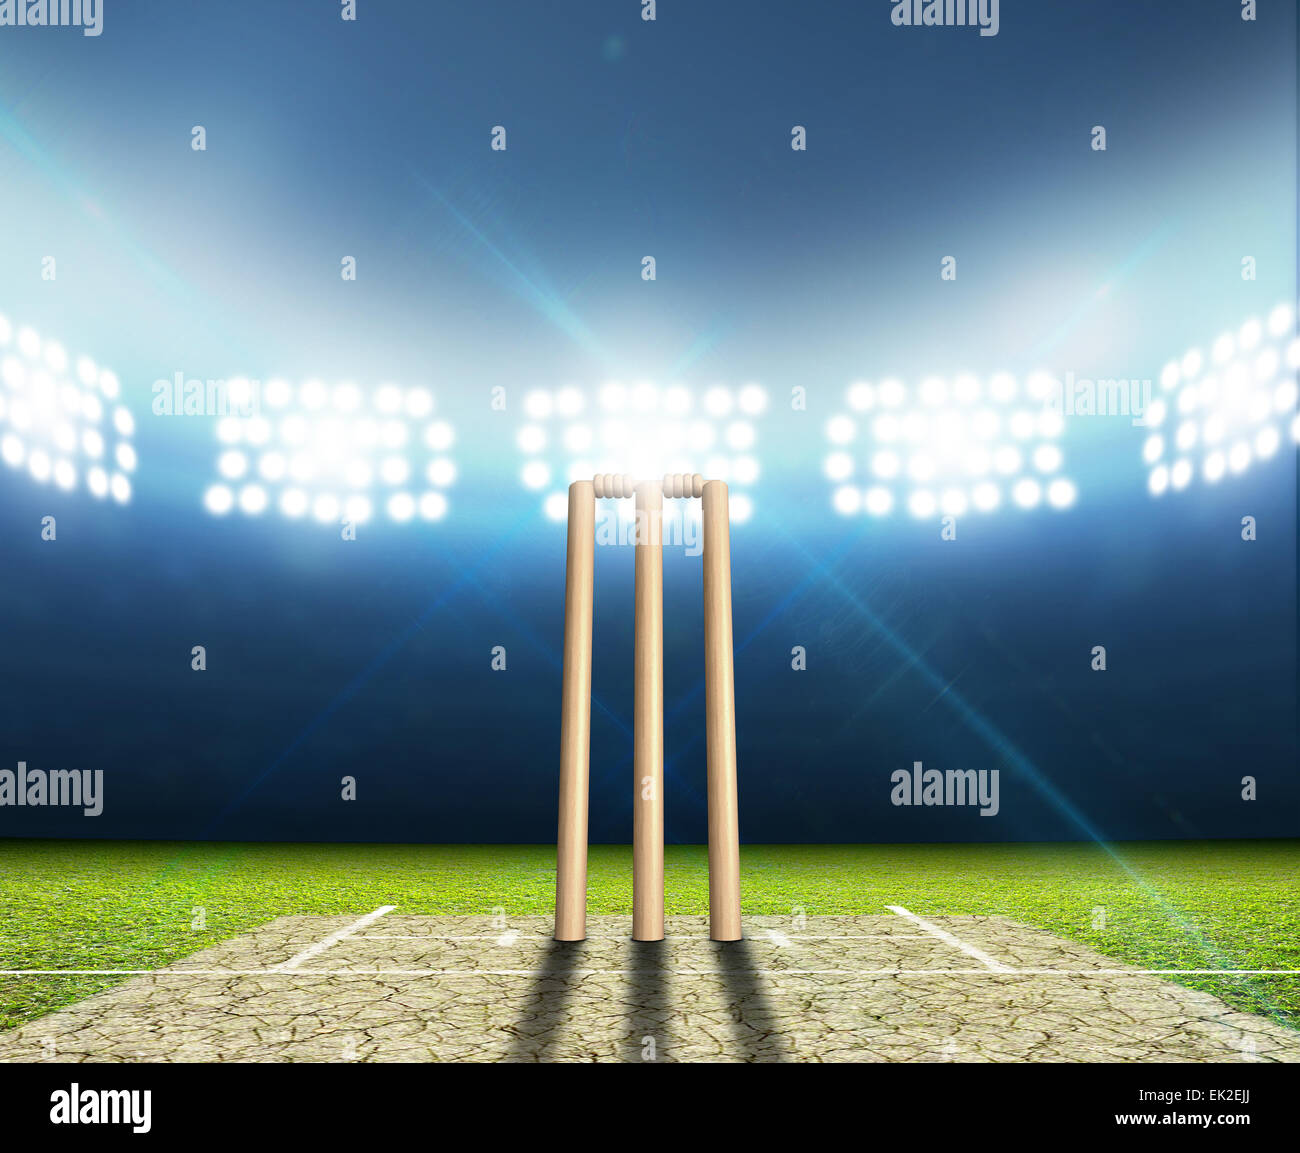 A cricket stadium with cricket pitch and set up wickets at night under  illuminated floodlights Stock Photo - Alamy